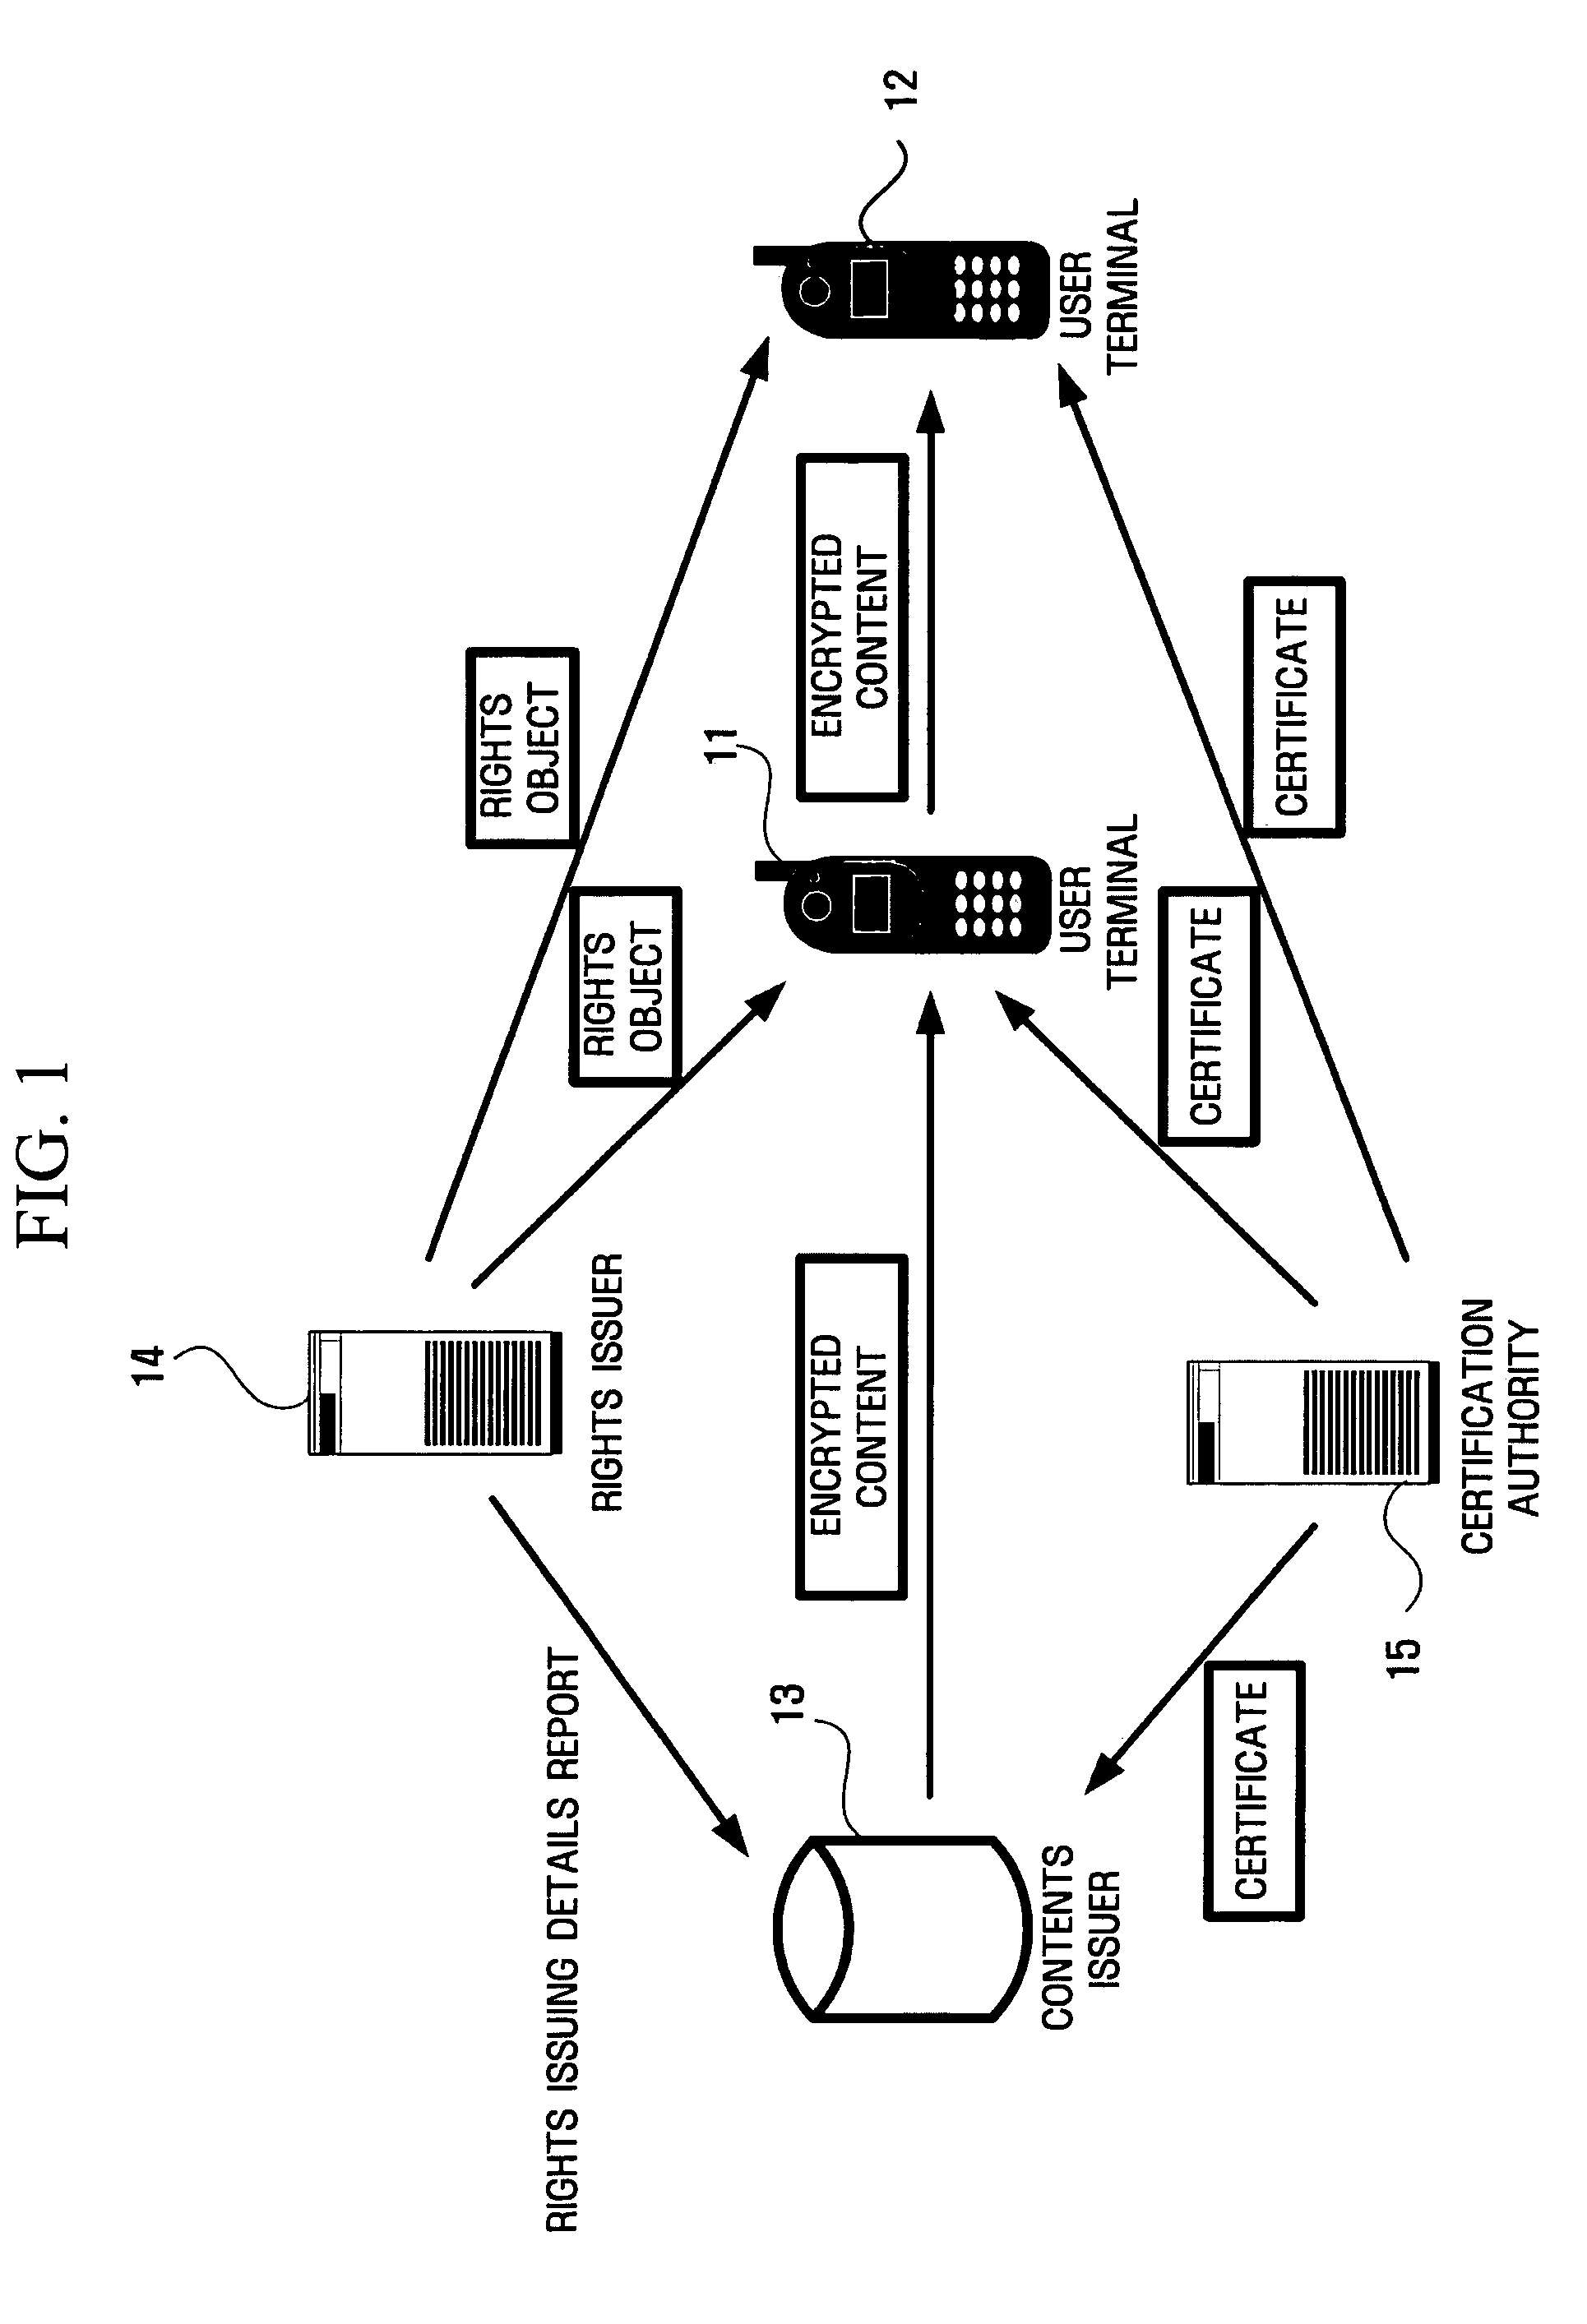 Digital rights management structure, portable storage device, and contents management method using the portable storage device